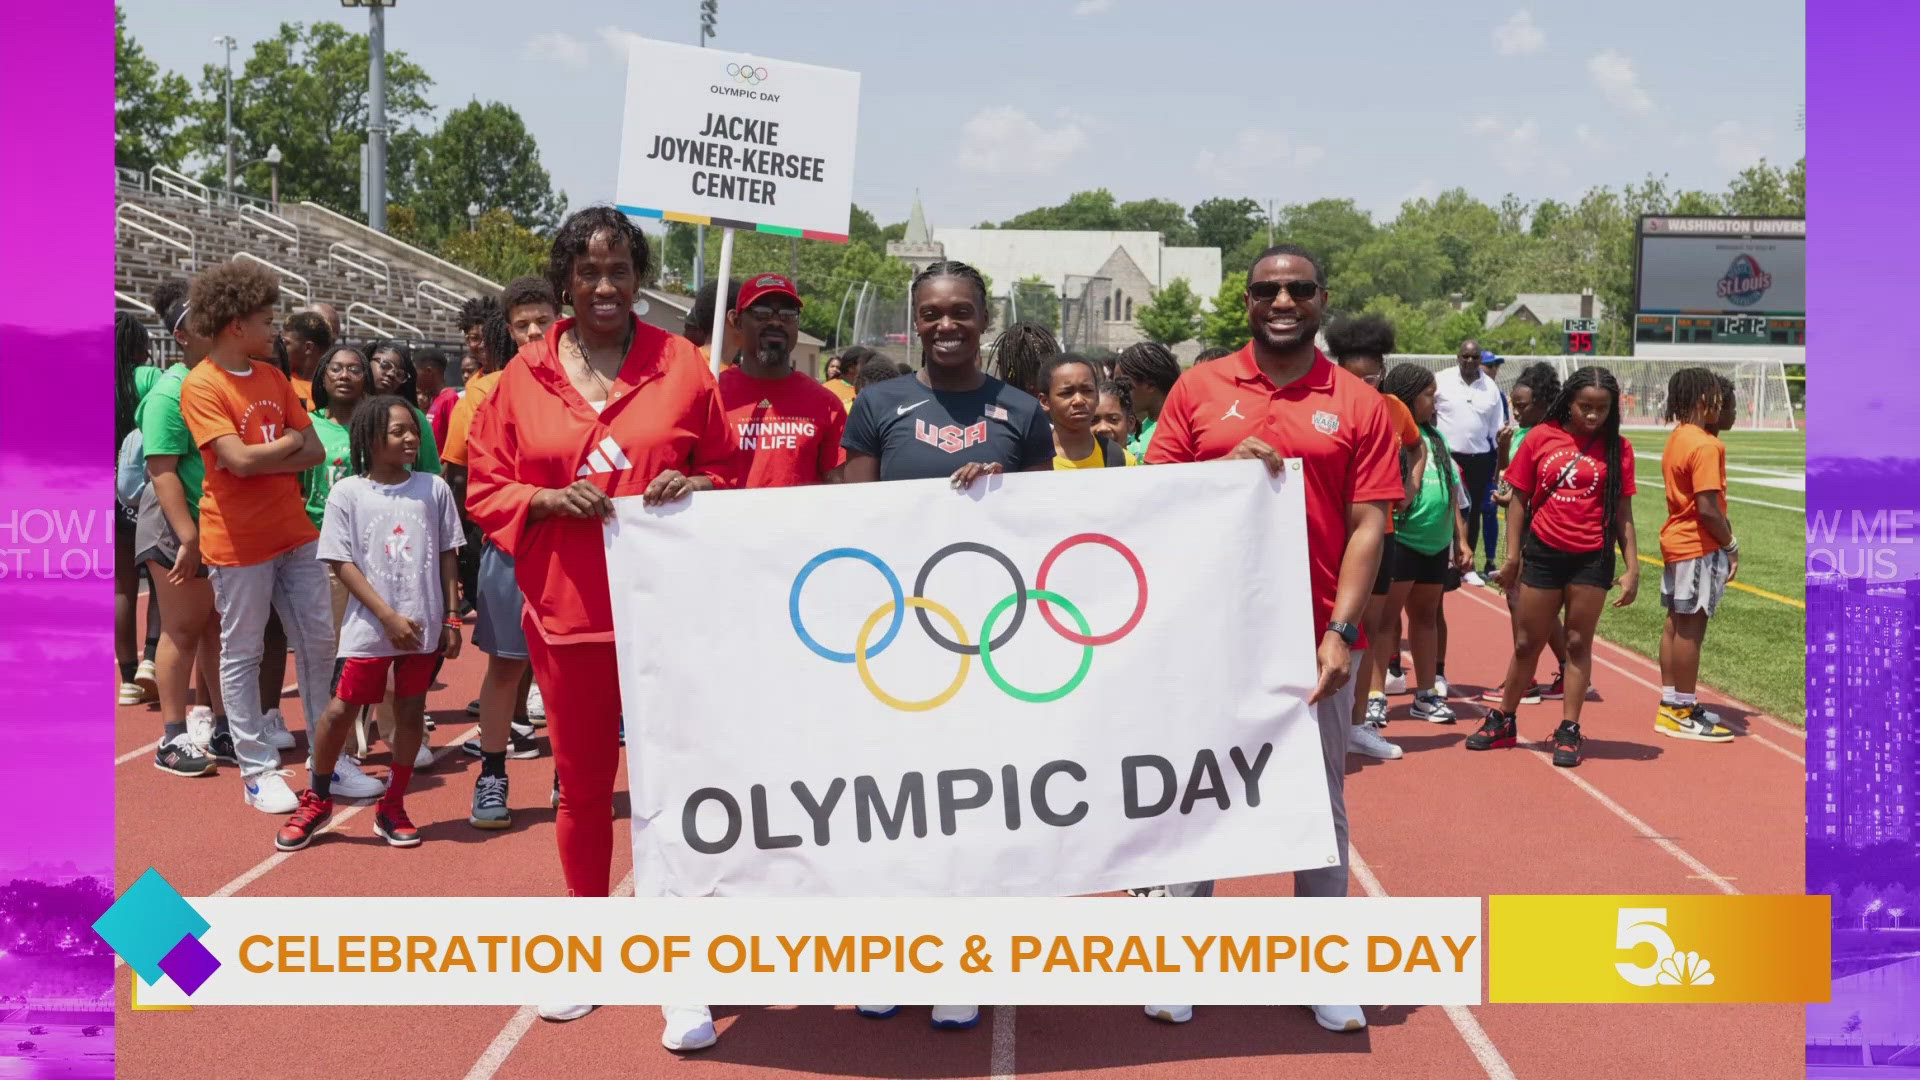 Jackie Joyner-Kersee and other St. Louis Olympians and Paralympians will join the community for a free event at Washington University June 21 11-12:30.